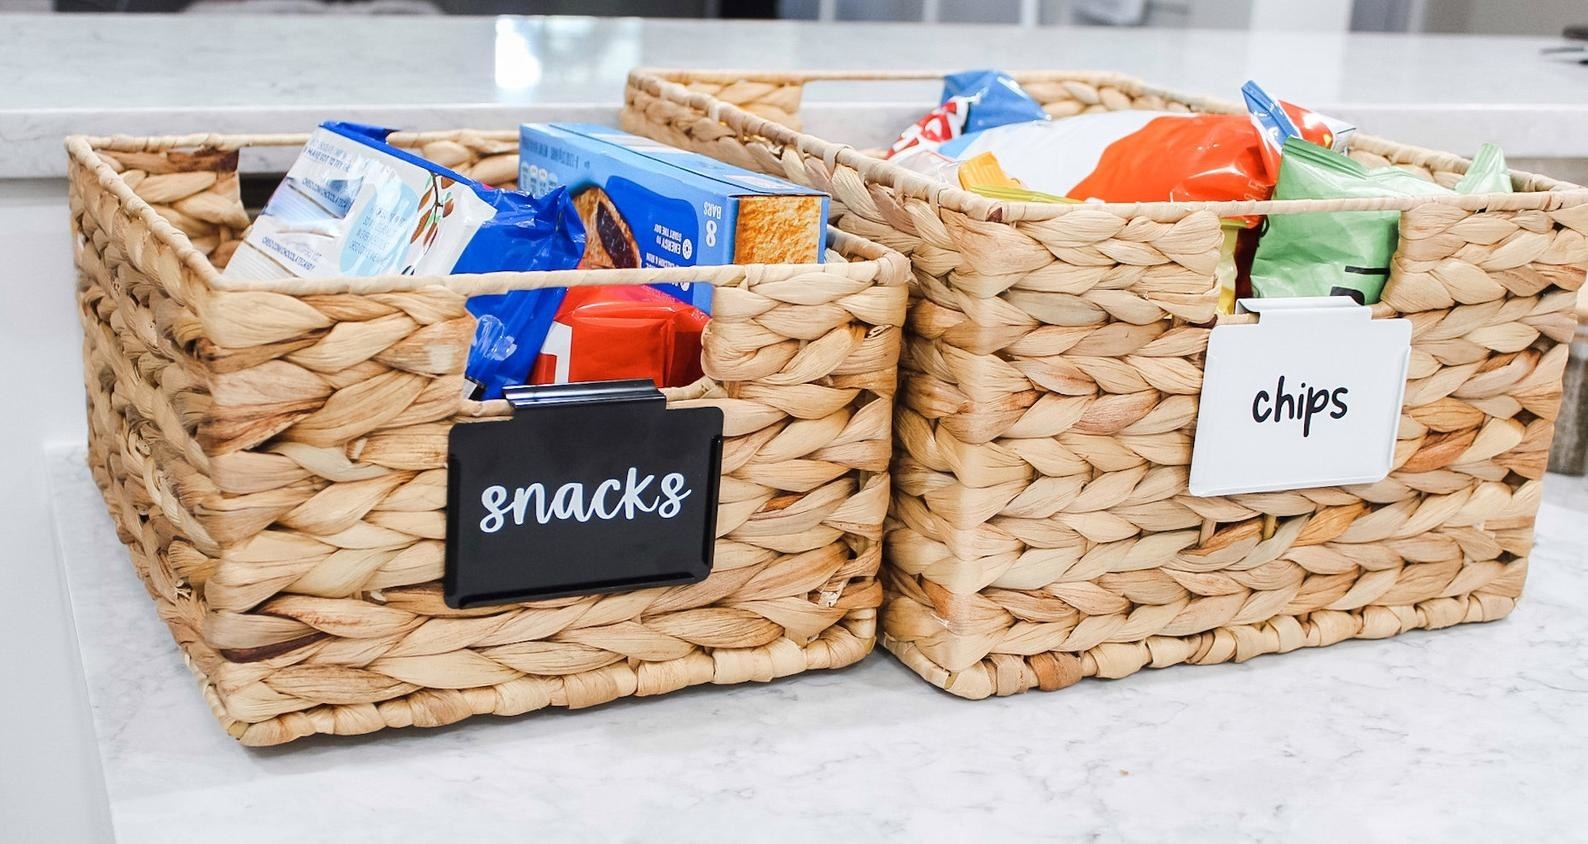 the custom vinyl labels clipped onto baskets one reads snacks and the other reads chips